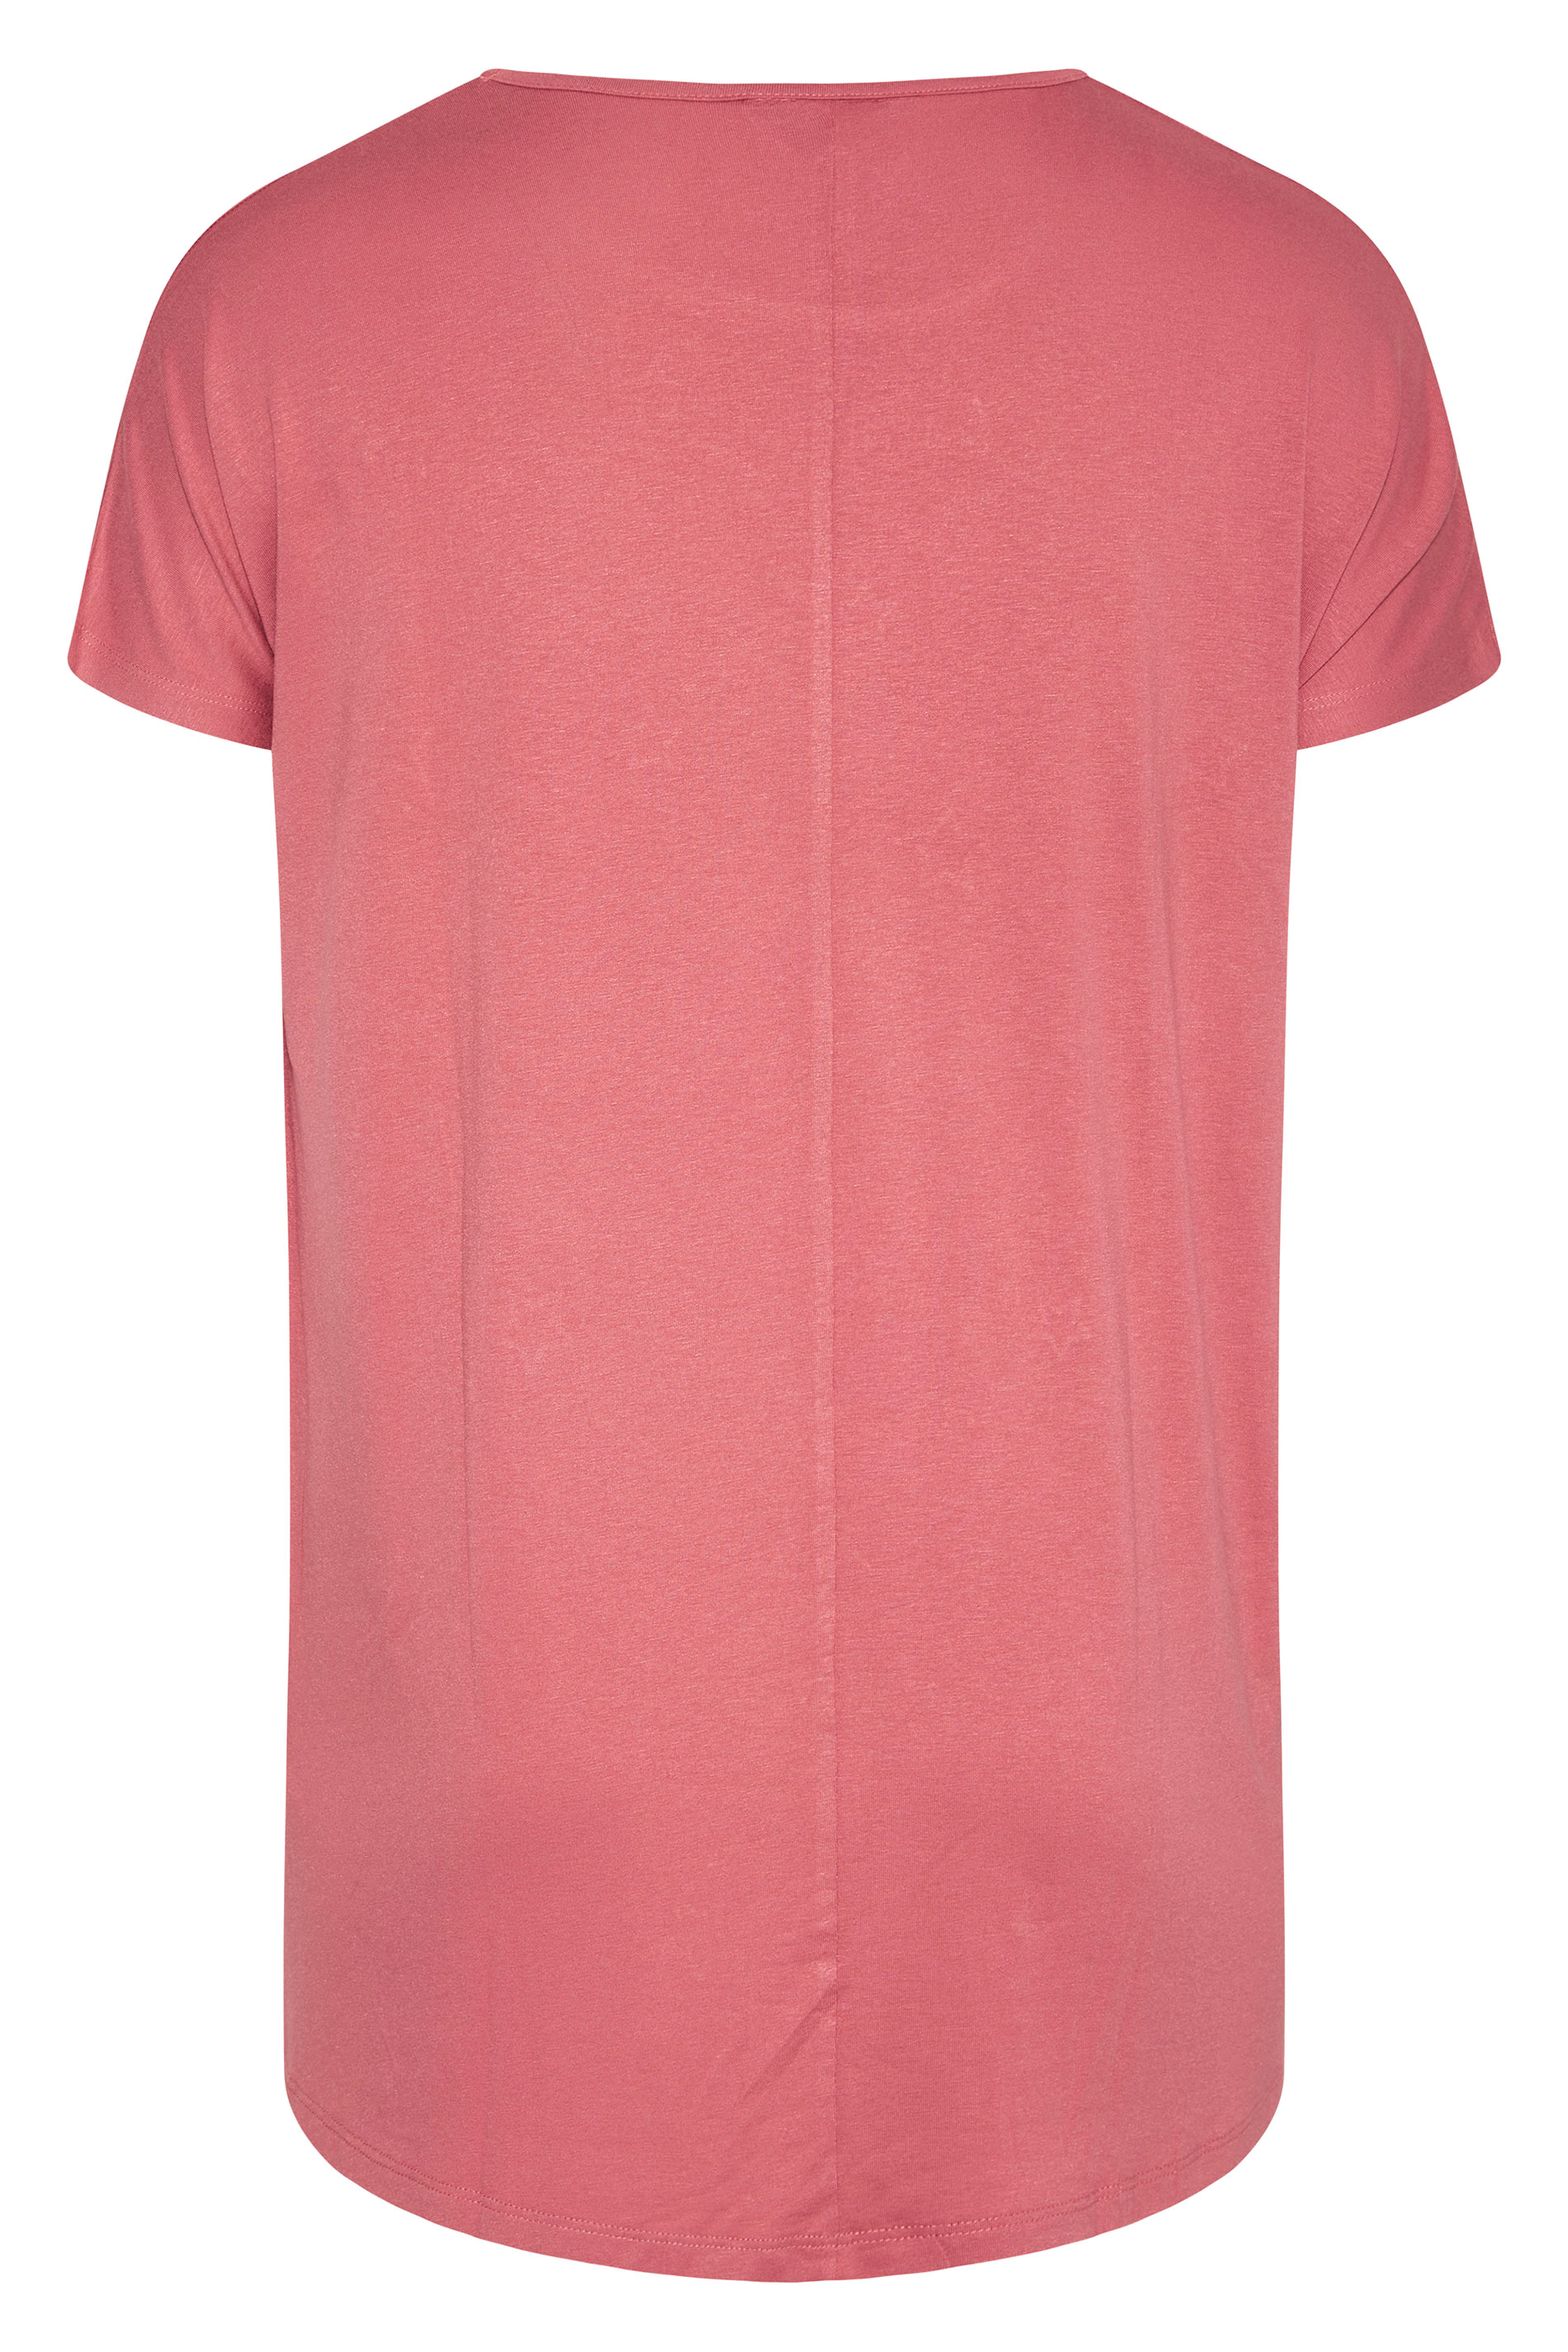 Grande taille  Tops Grande taille  Tops Casual | T-Shirt Rose Étoiles en Strass - AP50160